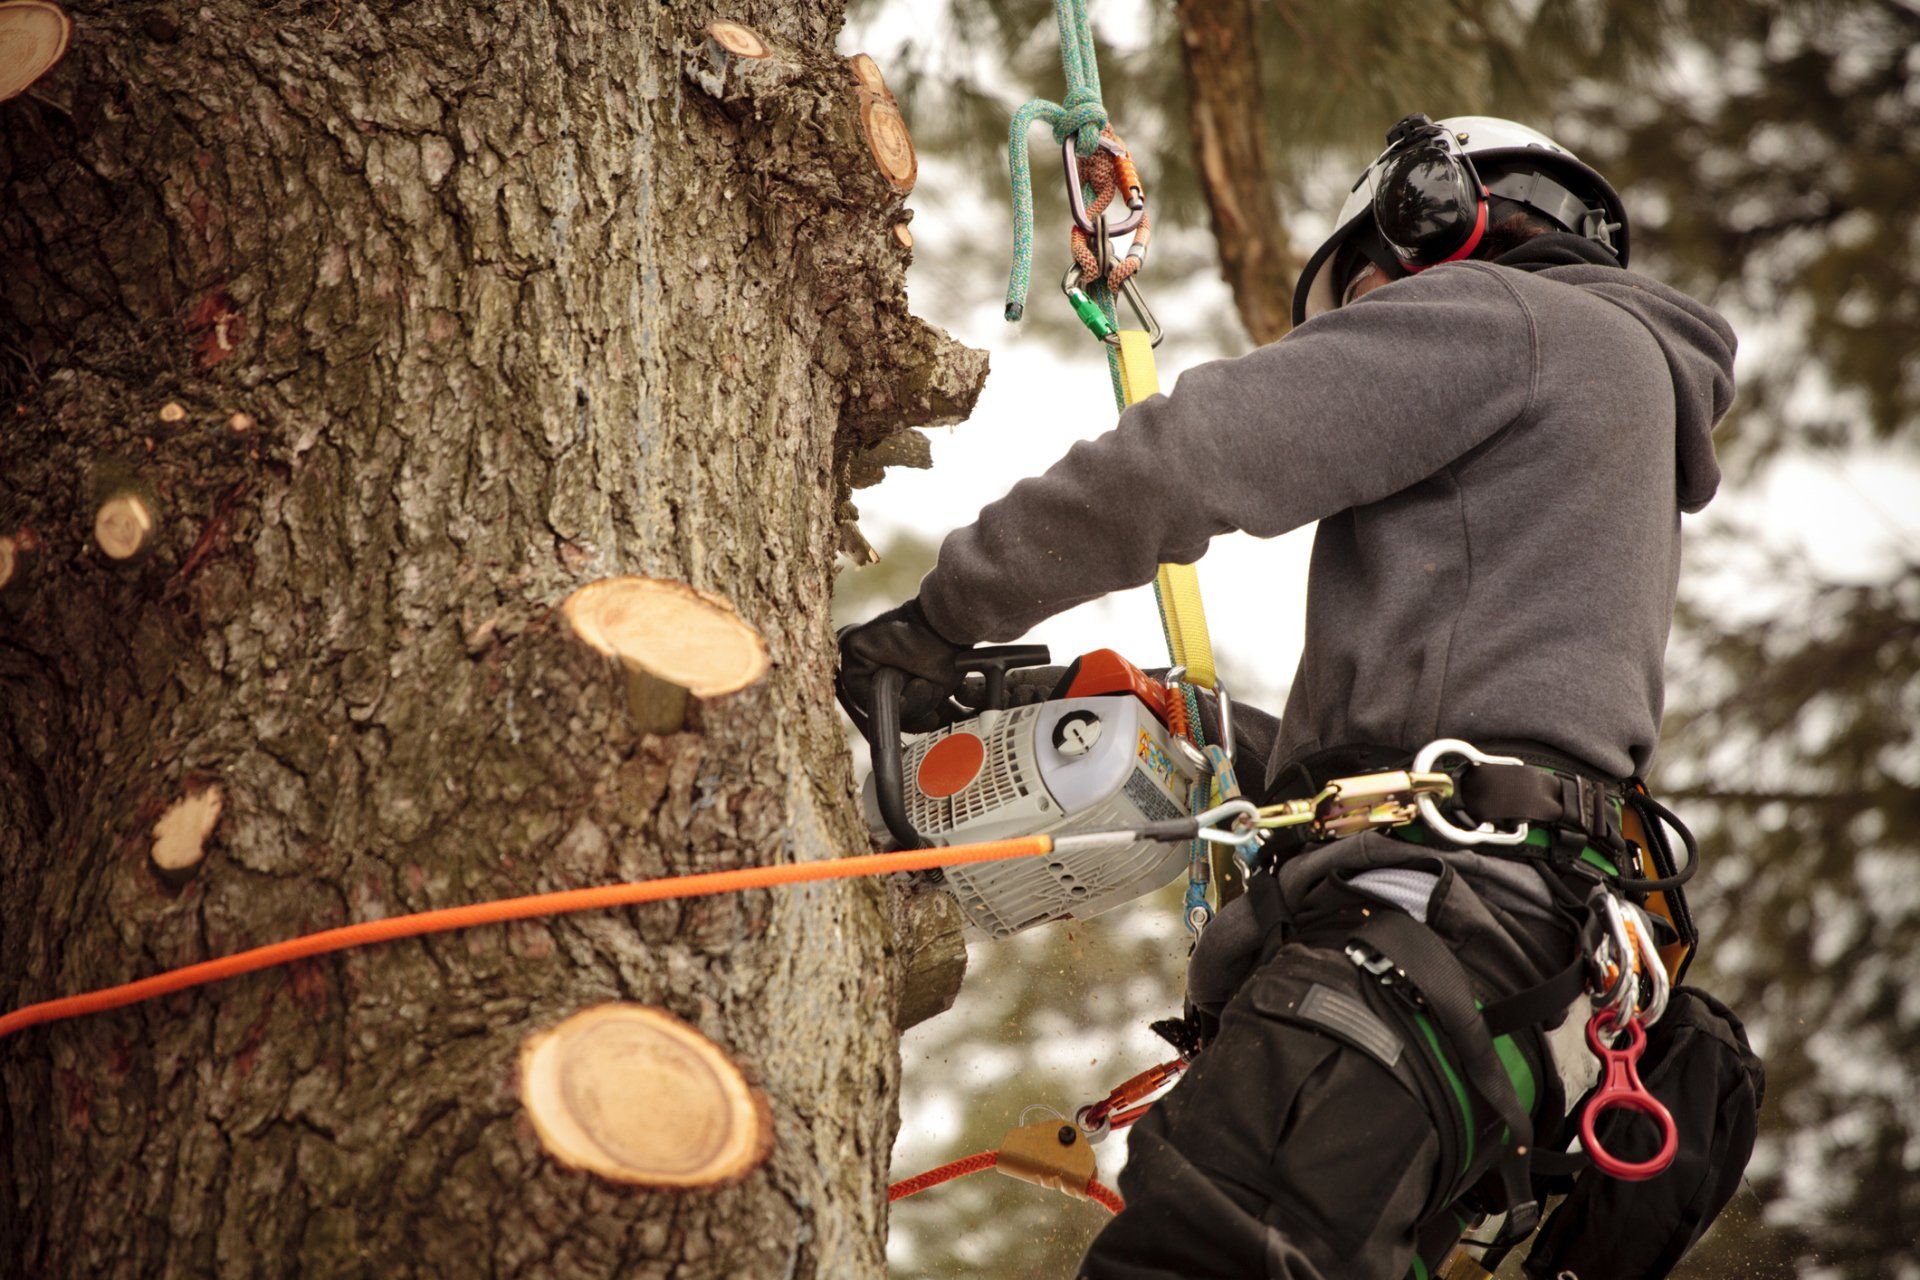 residential tree services, commercial tree services, parson and sons tree service, Arkansas tree services